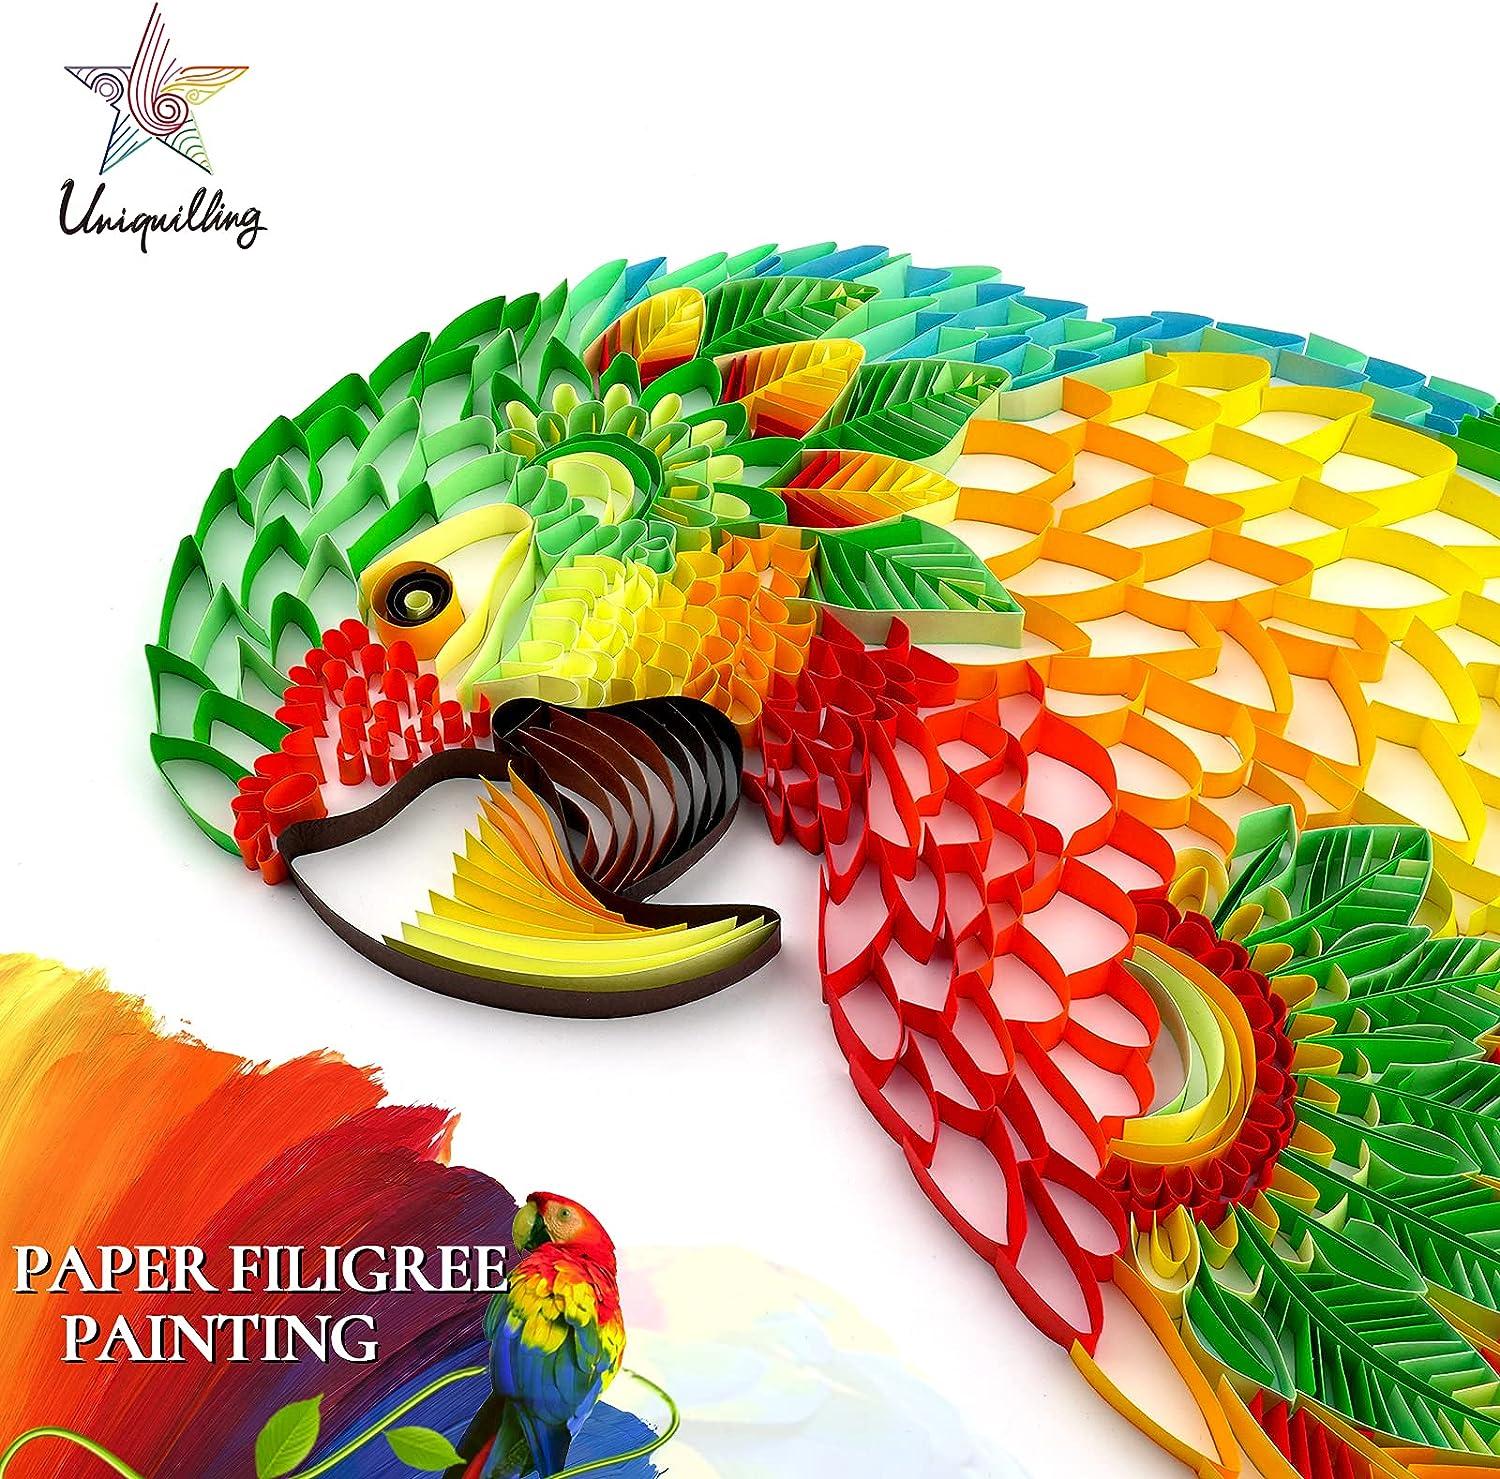 Uniquilling Quilling Kits Paper Quilling Kit for Adults Beginner